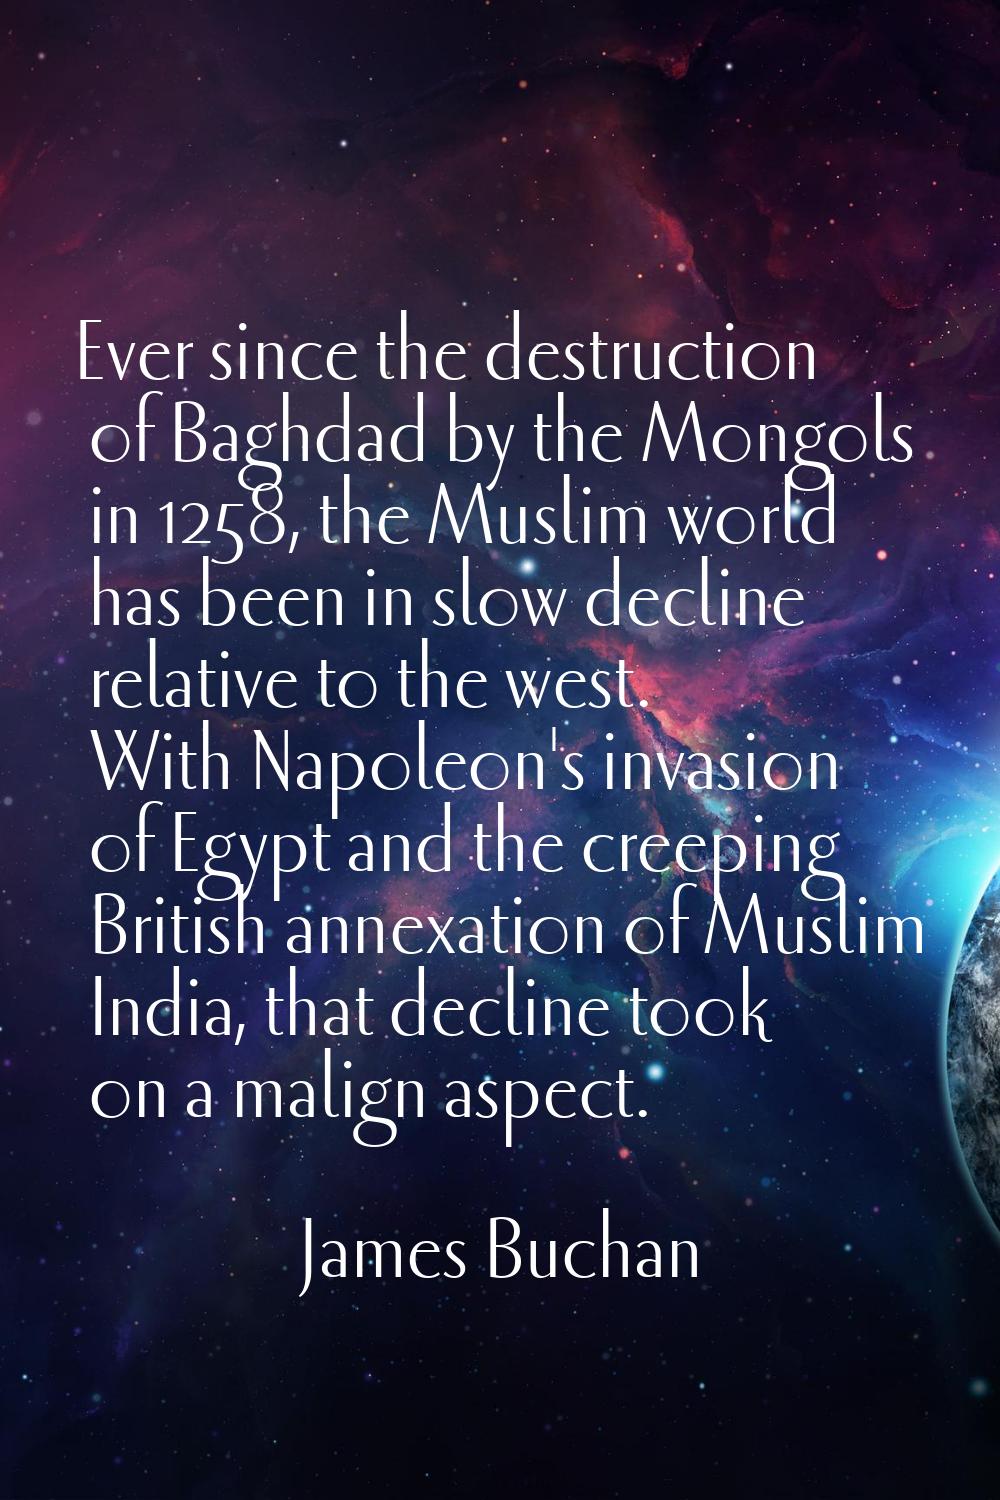 Ever since the destruction of Baghdad by the Mongols in 1258, the Muslim world has been in slow dec